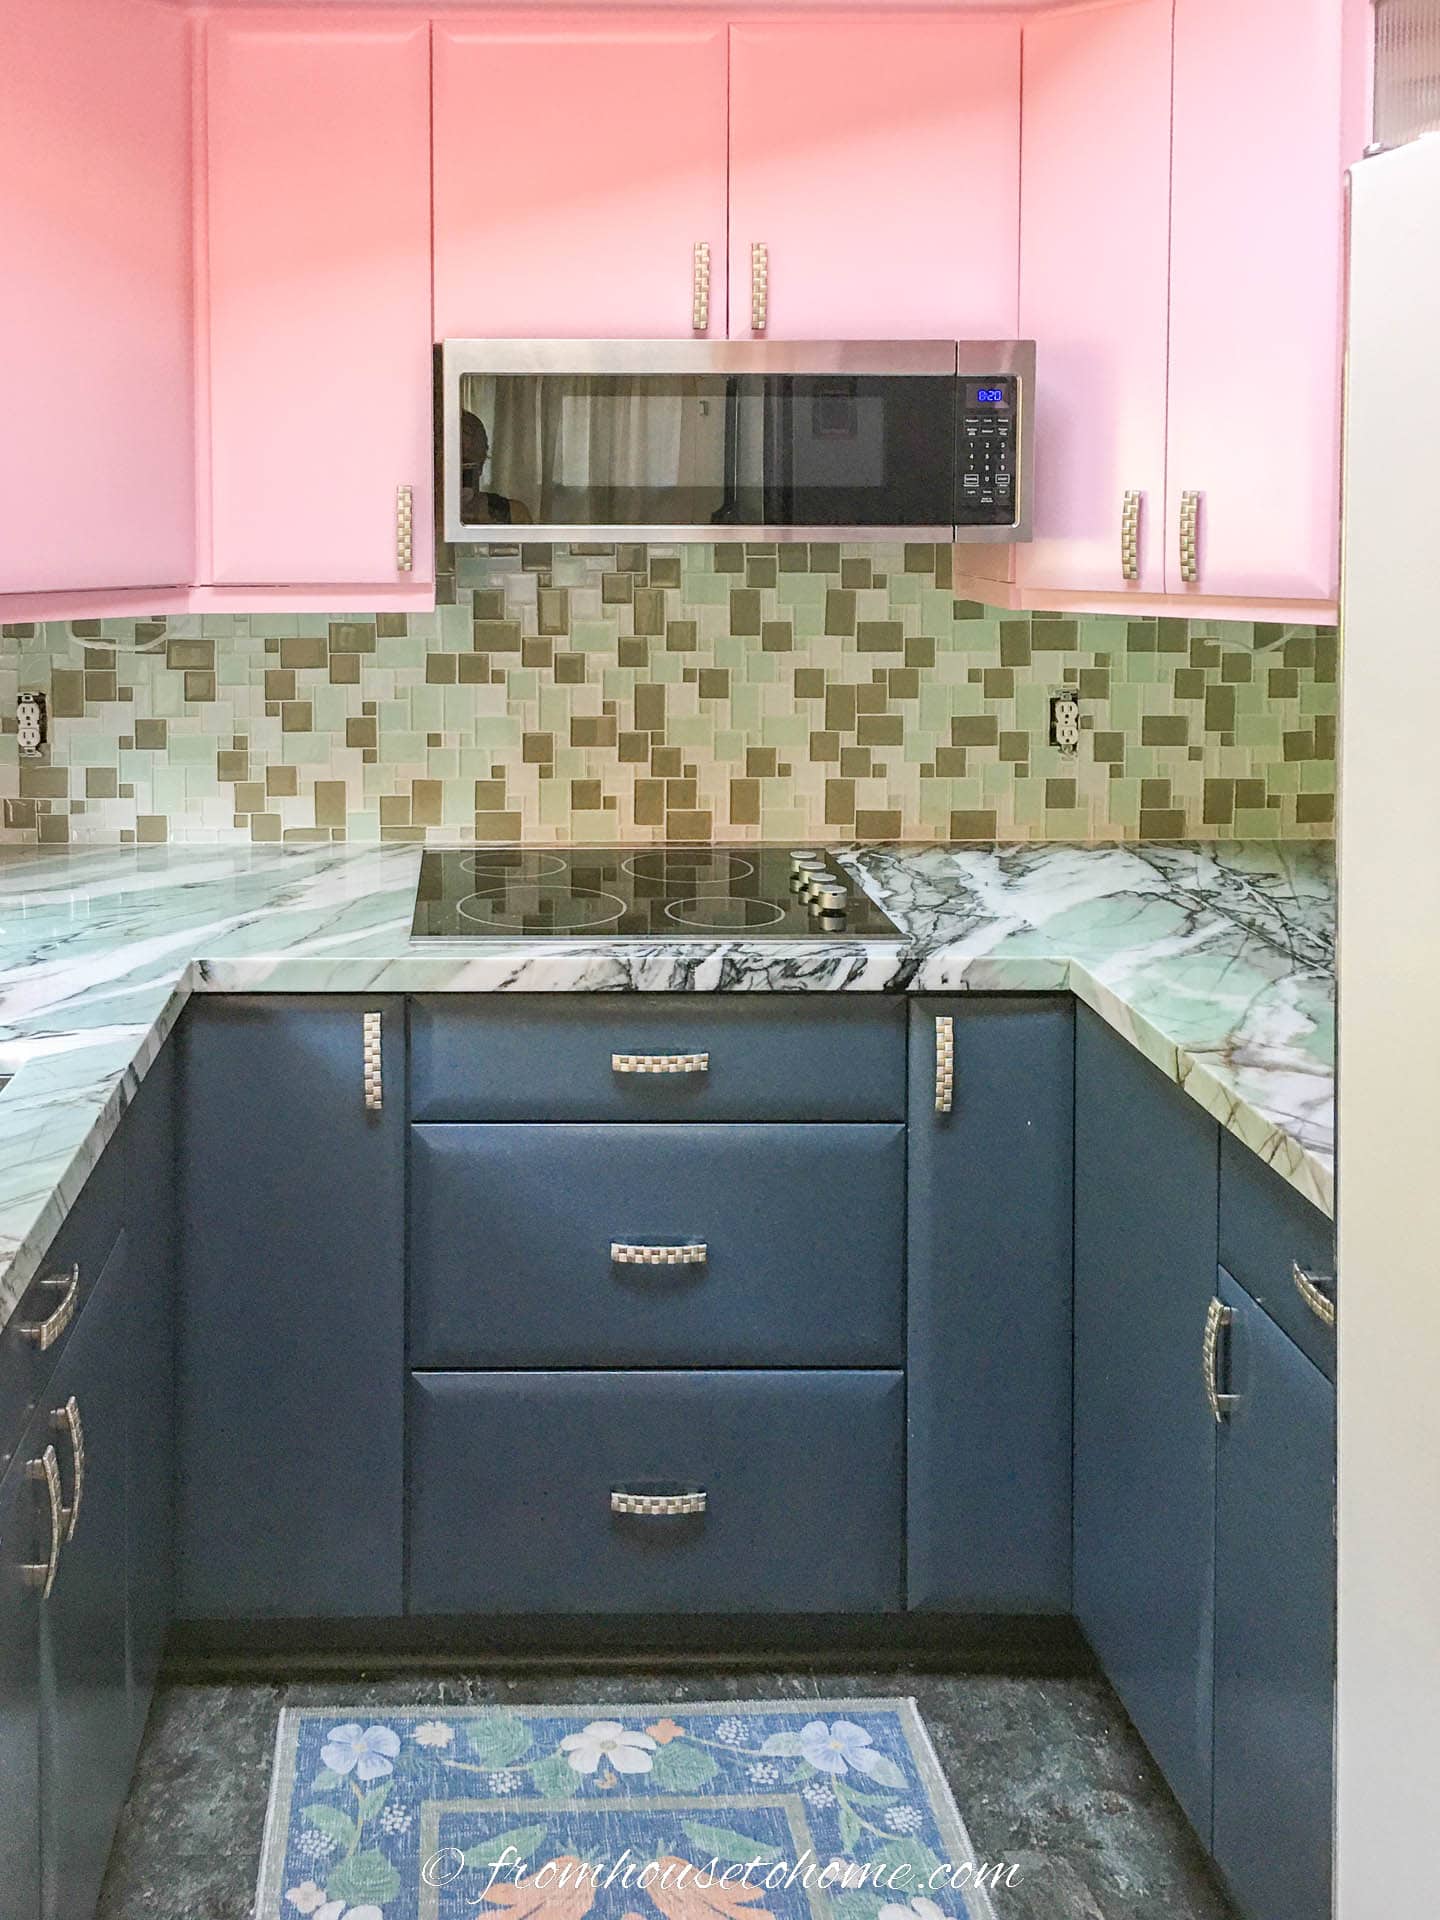 "After" picture of a pink and blue kitchen with quartzite countertop and glass mosaic backsplash